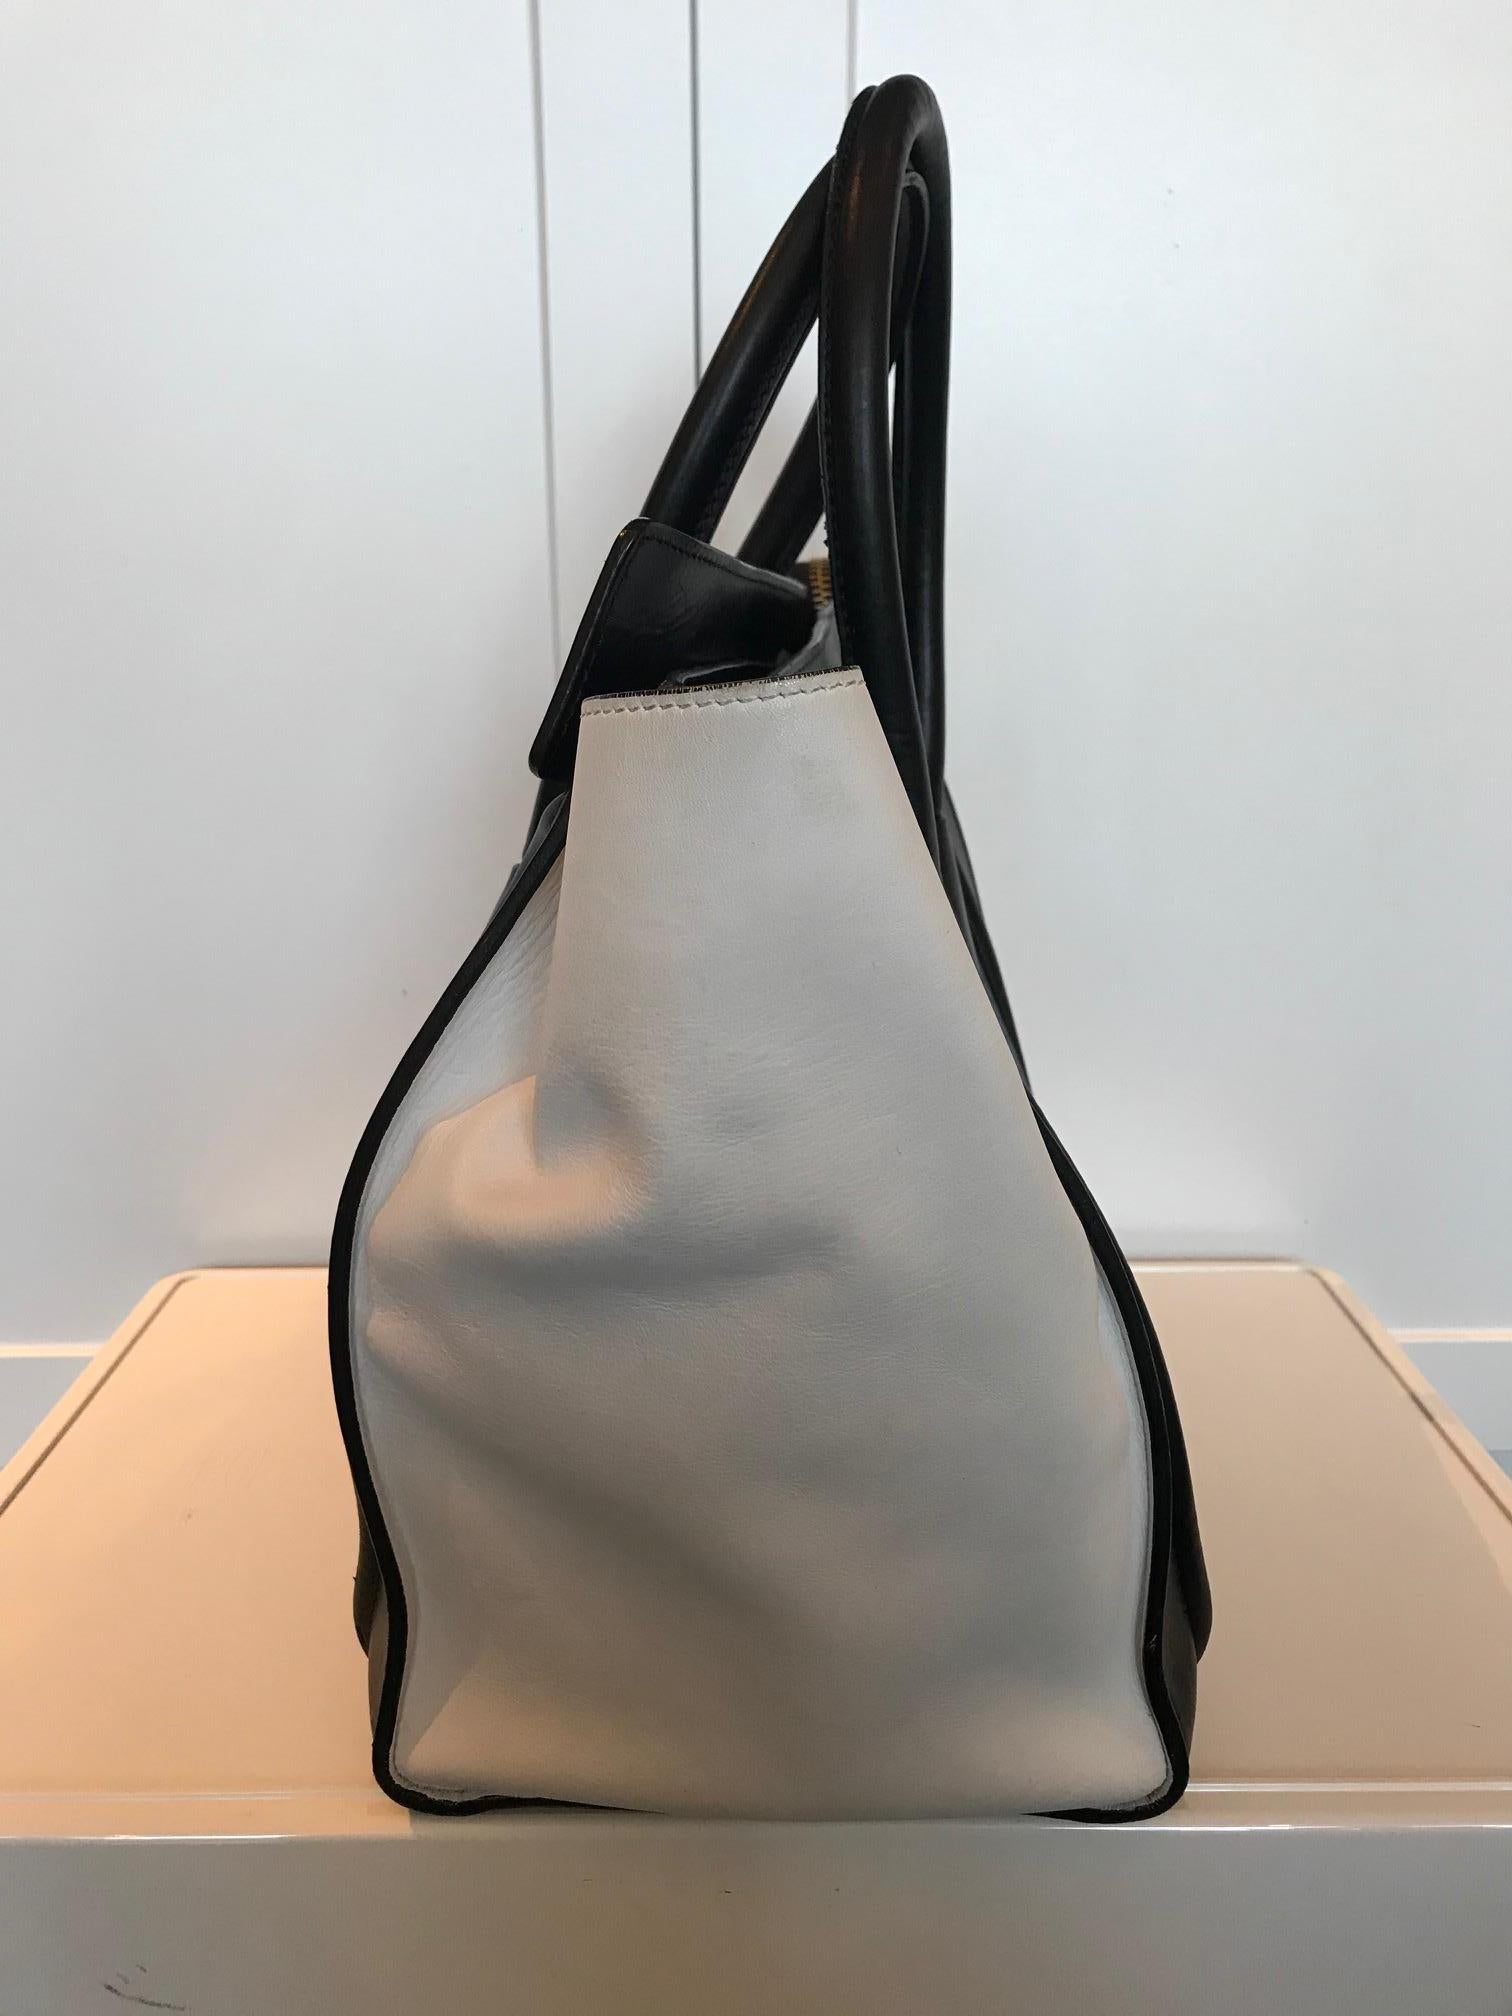 Celine Skin and Leather Mini Luggage Tote In Good Condition For Sale In Roslyn, NY